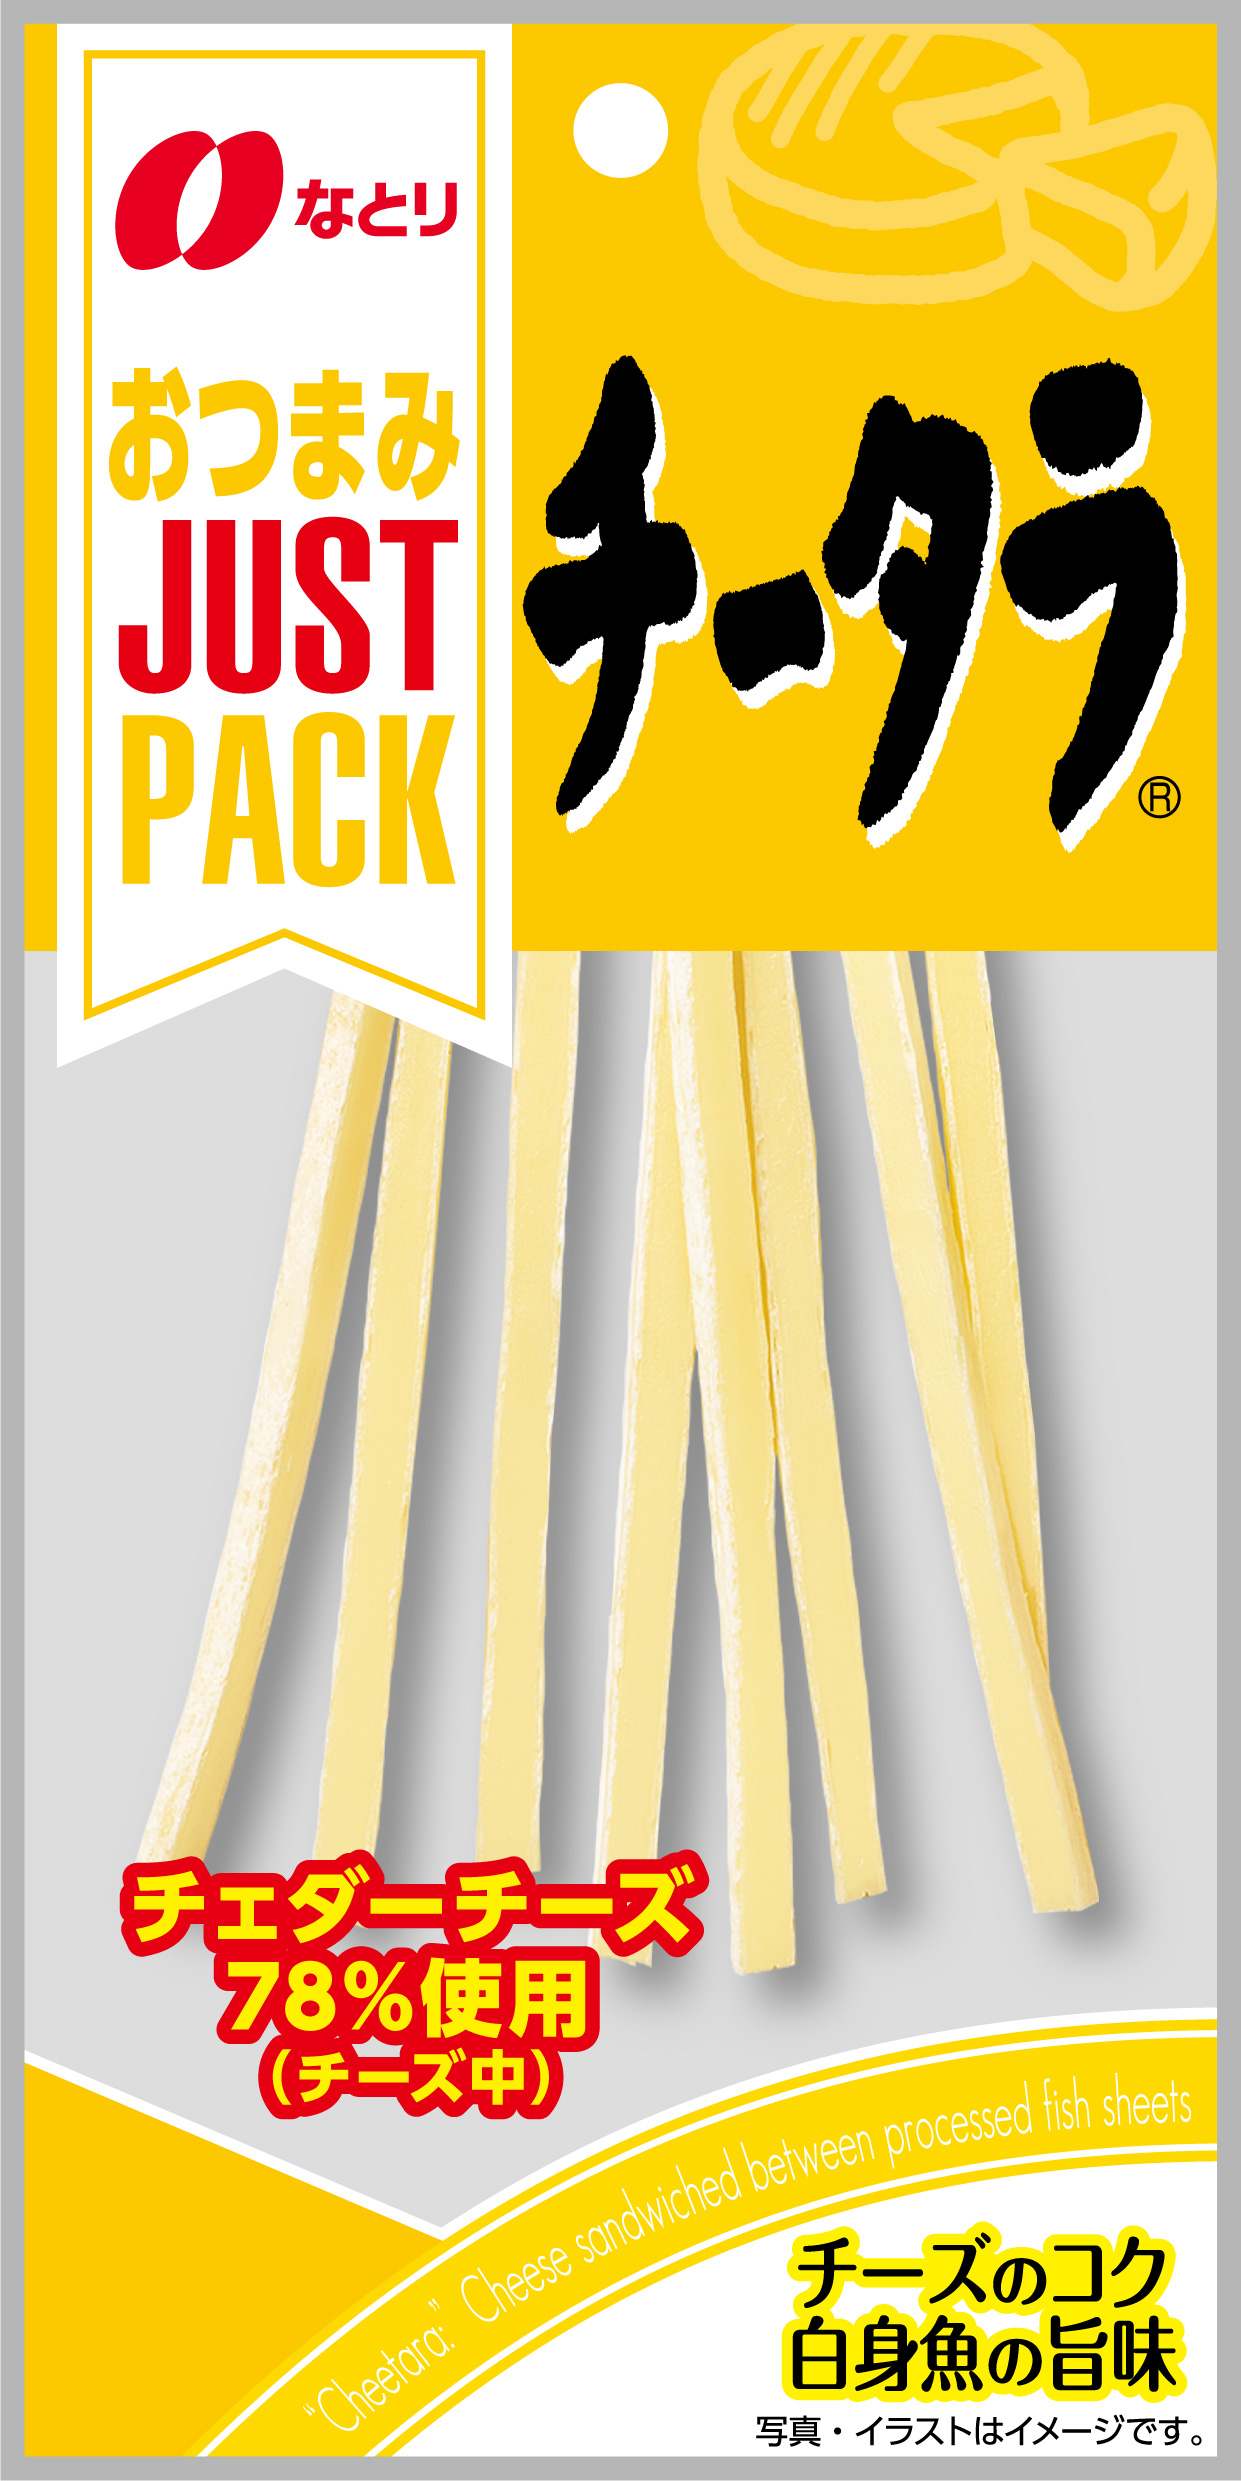 JUST PACK<br>チータラ®